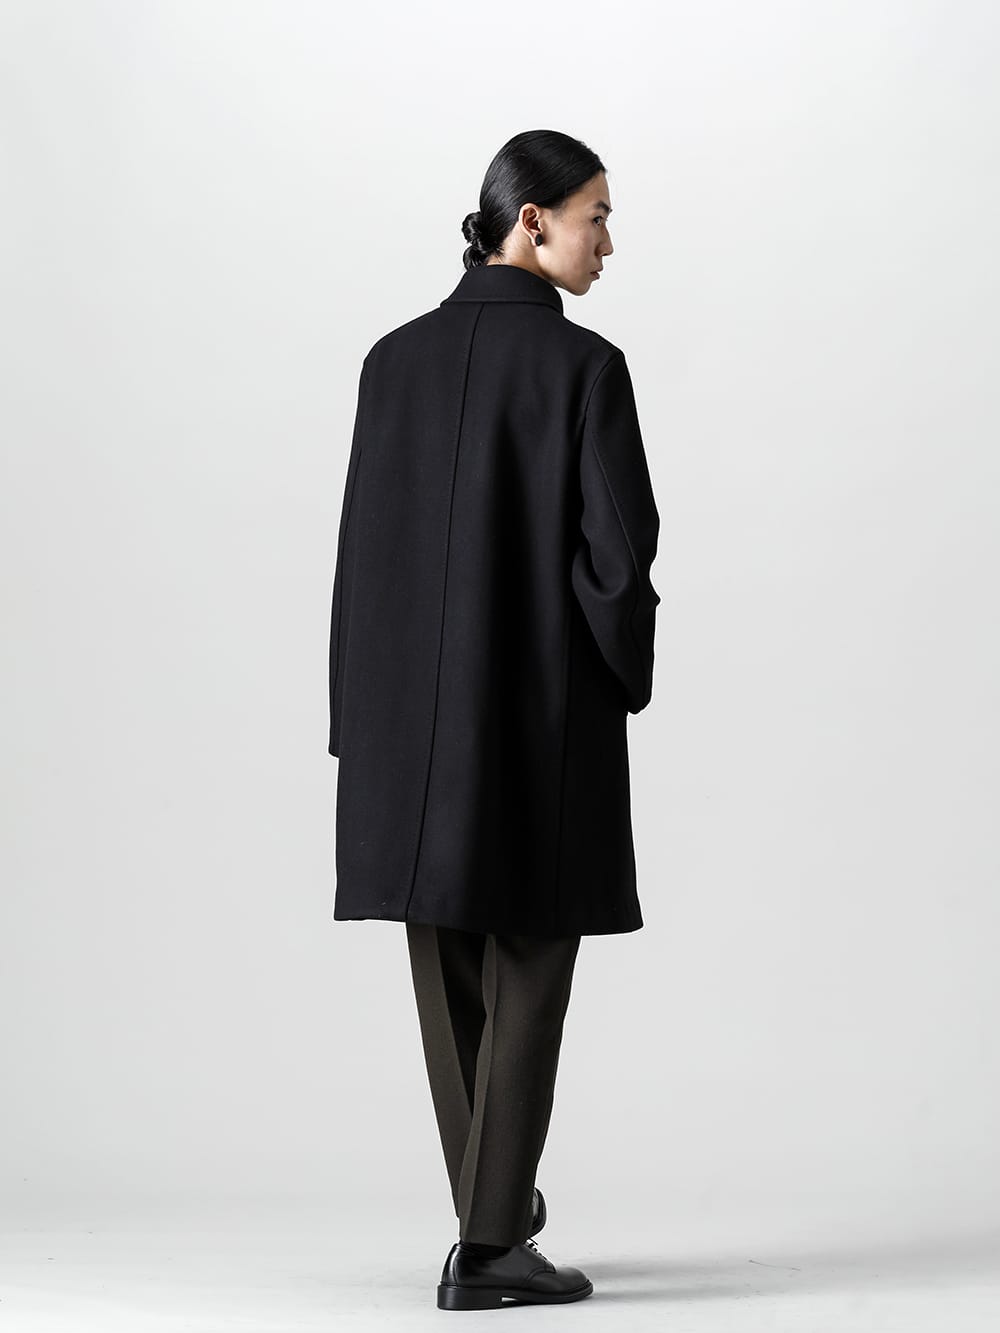 Arrival information] IRENISA 22-23AW collection is now available